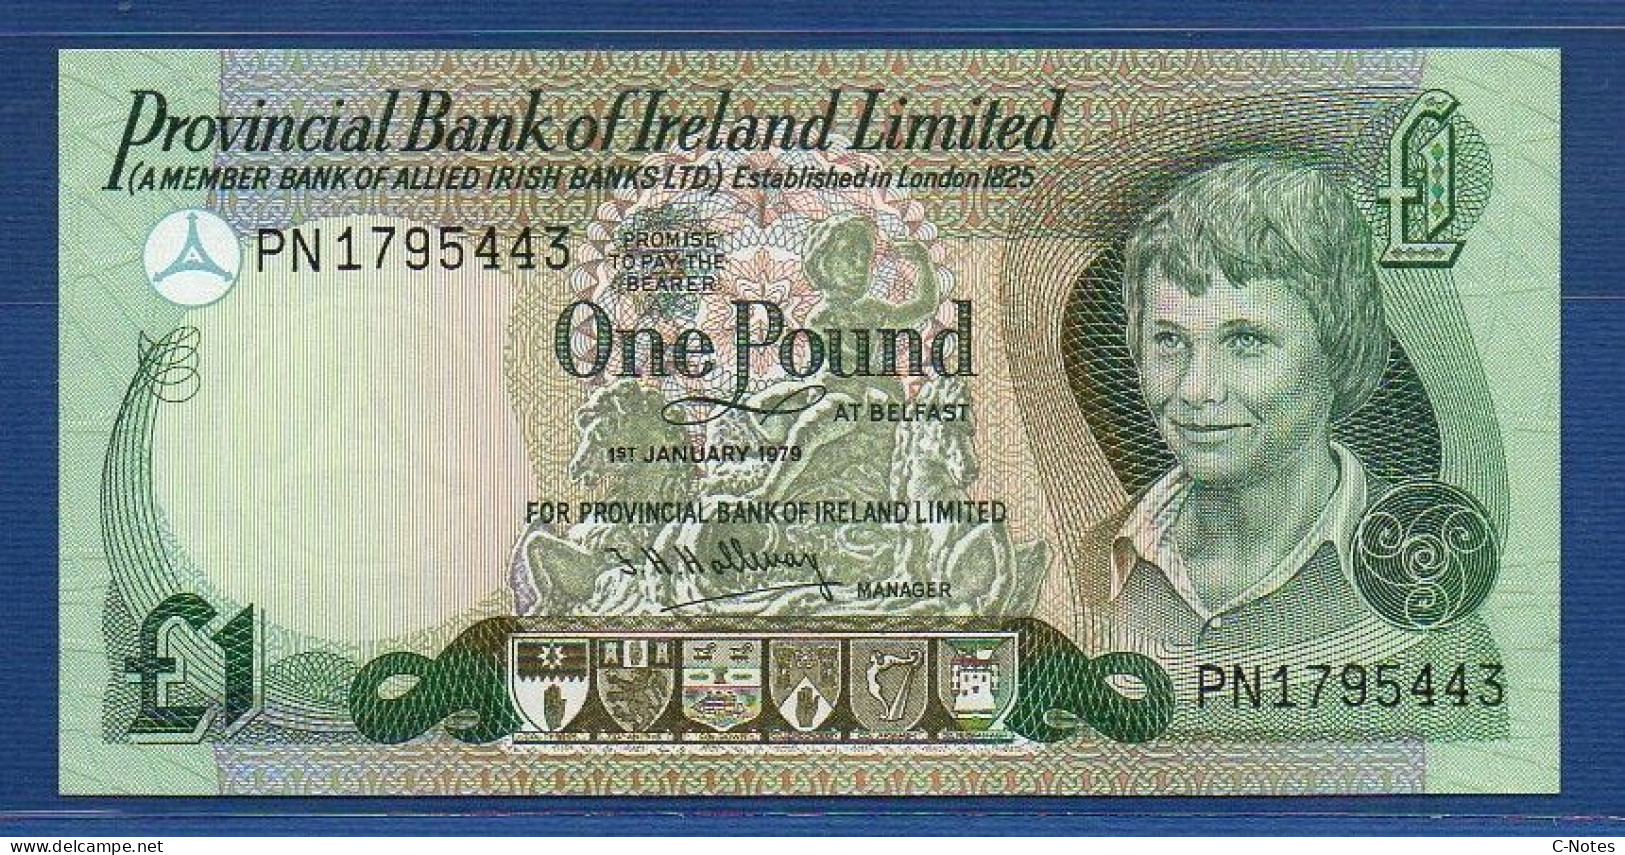 NORTHERN IRELAND - P.247b – 1 POUND 01.01.1979 UNC, S/n PN1795443 Provincial Bank Of Ireland Limited - 1 Pond